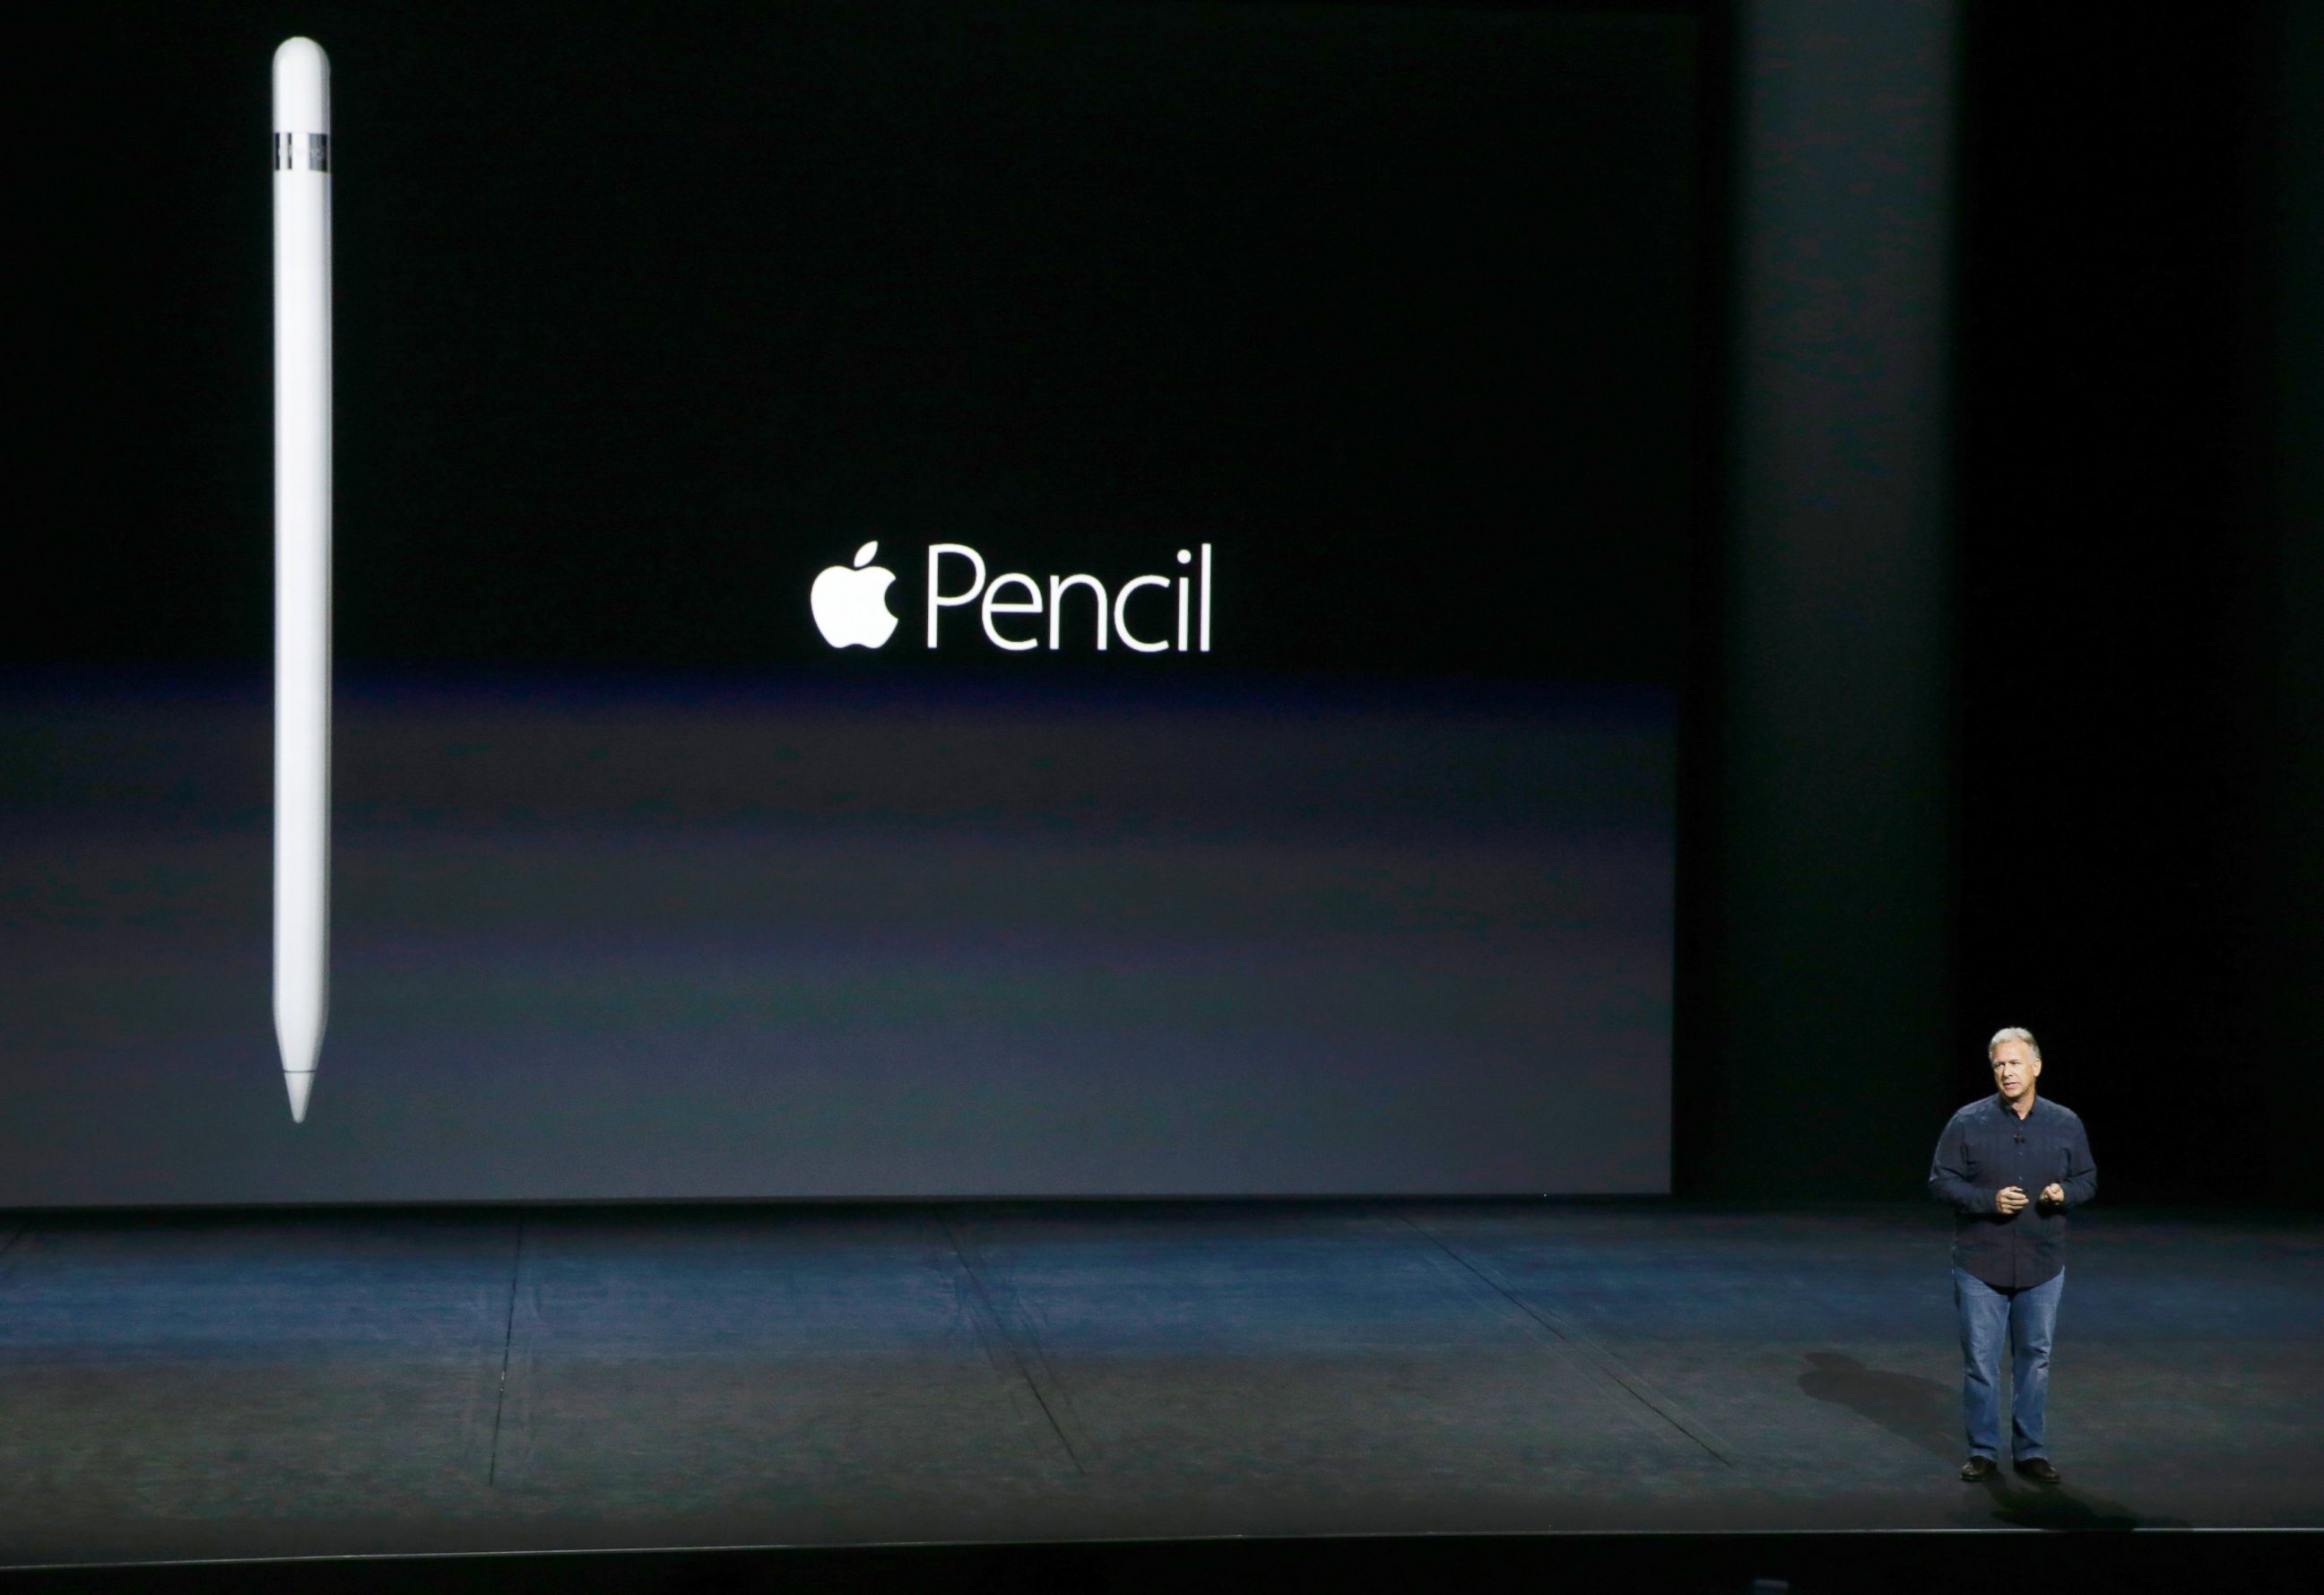 PHOTO: Phil Schiller, Apple's senior vice president of worldwide marketing, introduces the new Apple Pencil at the Apple event in the Bill Graham Civic Auditorium in San Francisco, Sept. 9, 2015.